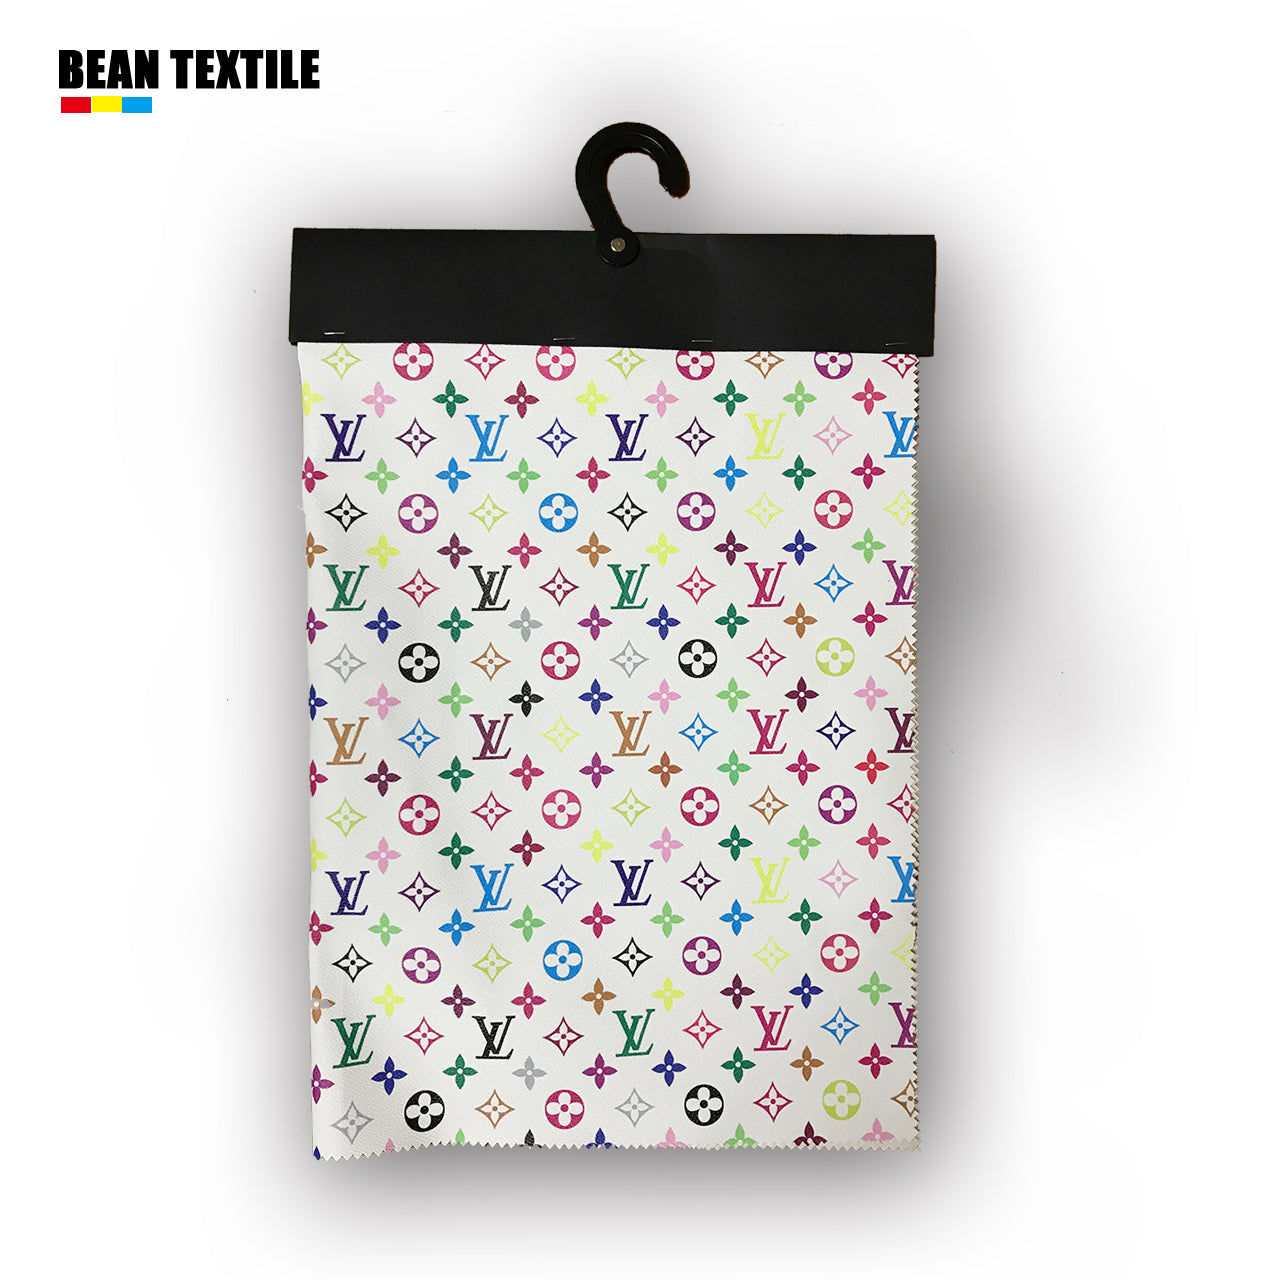 White synthetic leather with multi-color LV monogram print – logofabrics